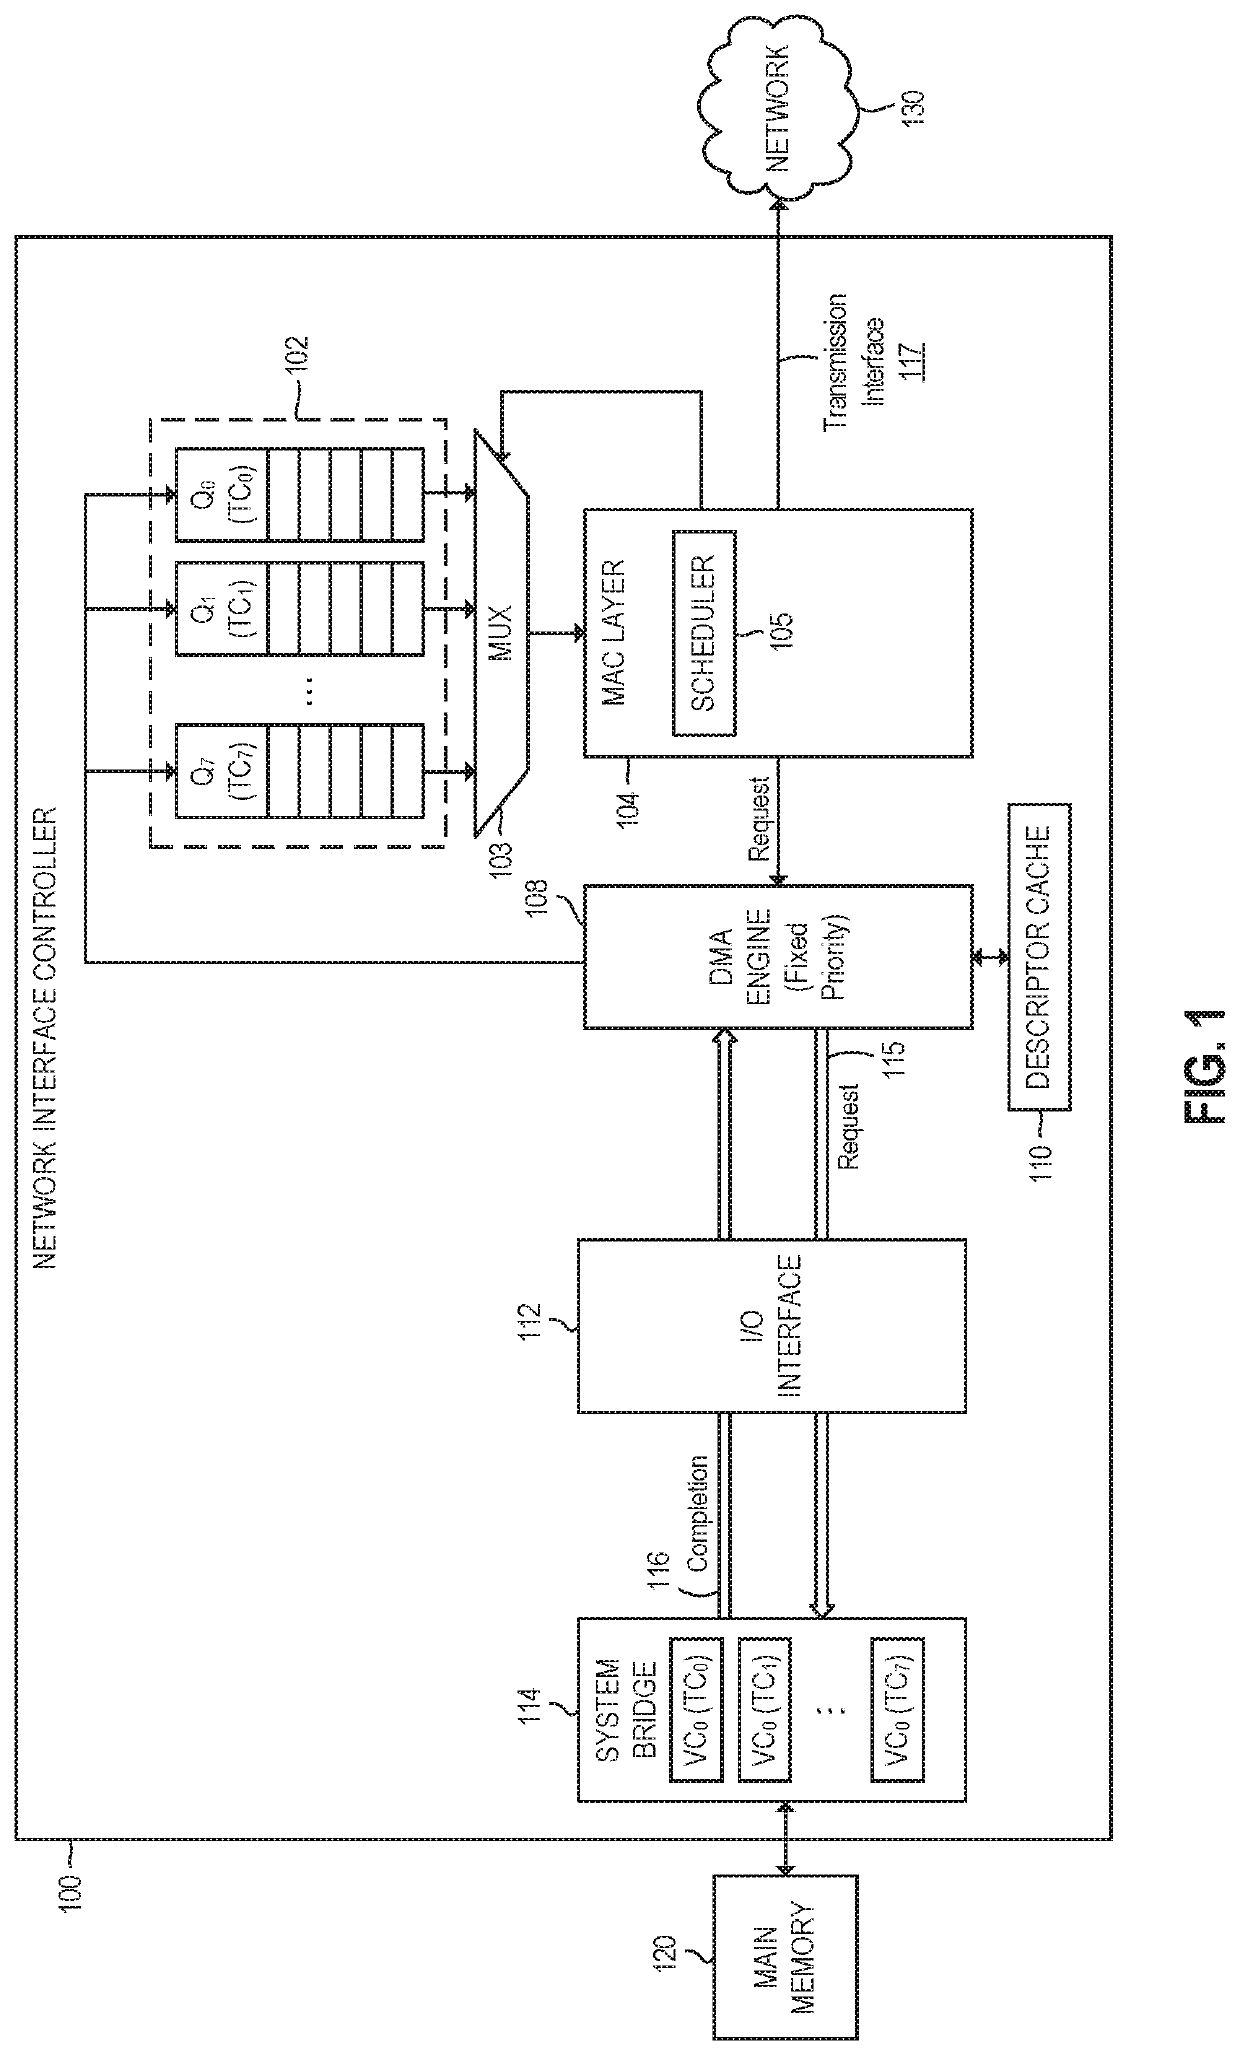 Deterministic packet scheduling and DMA for time sensitive networking